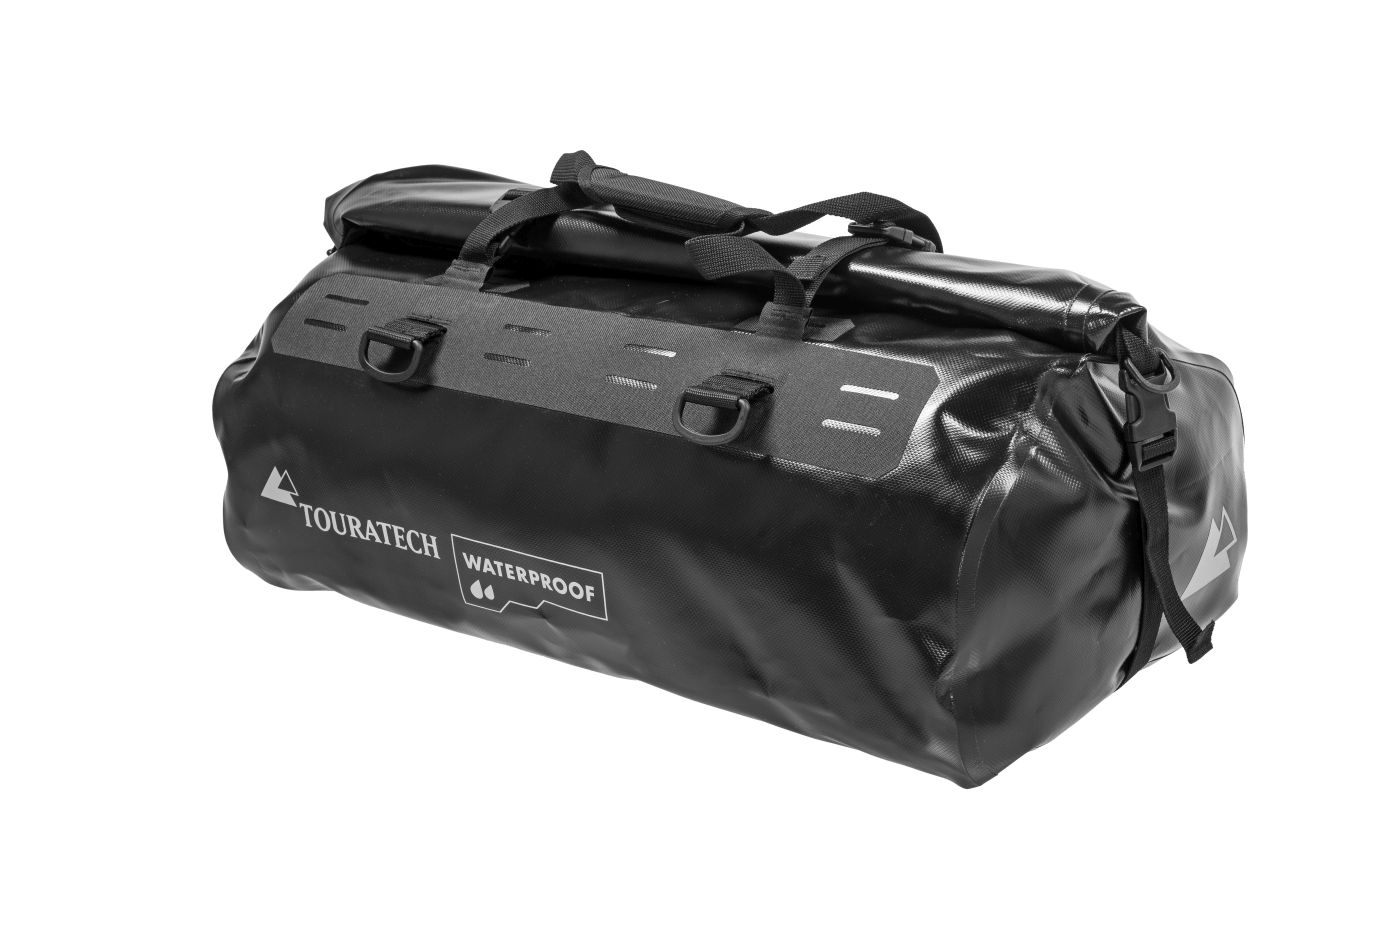 Sac polochon Rack-Pack, taille M, 31 litres, noir, by Touratech Waterproof  - Temersit